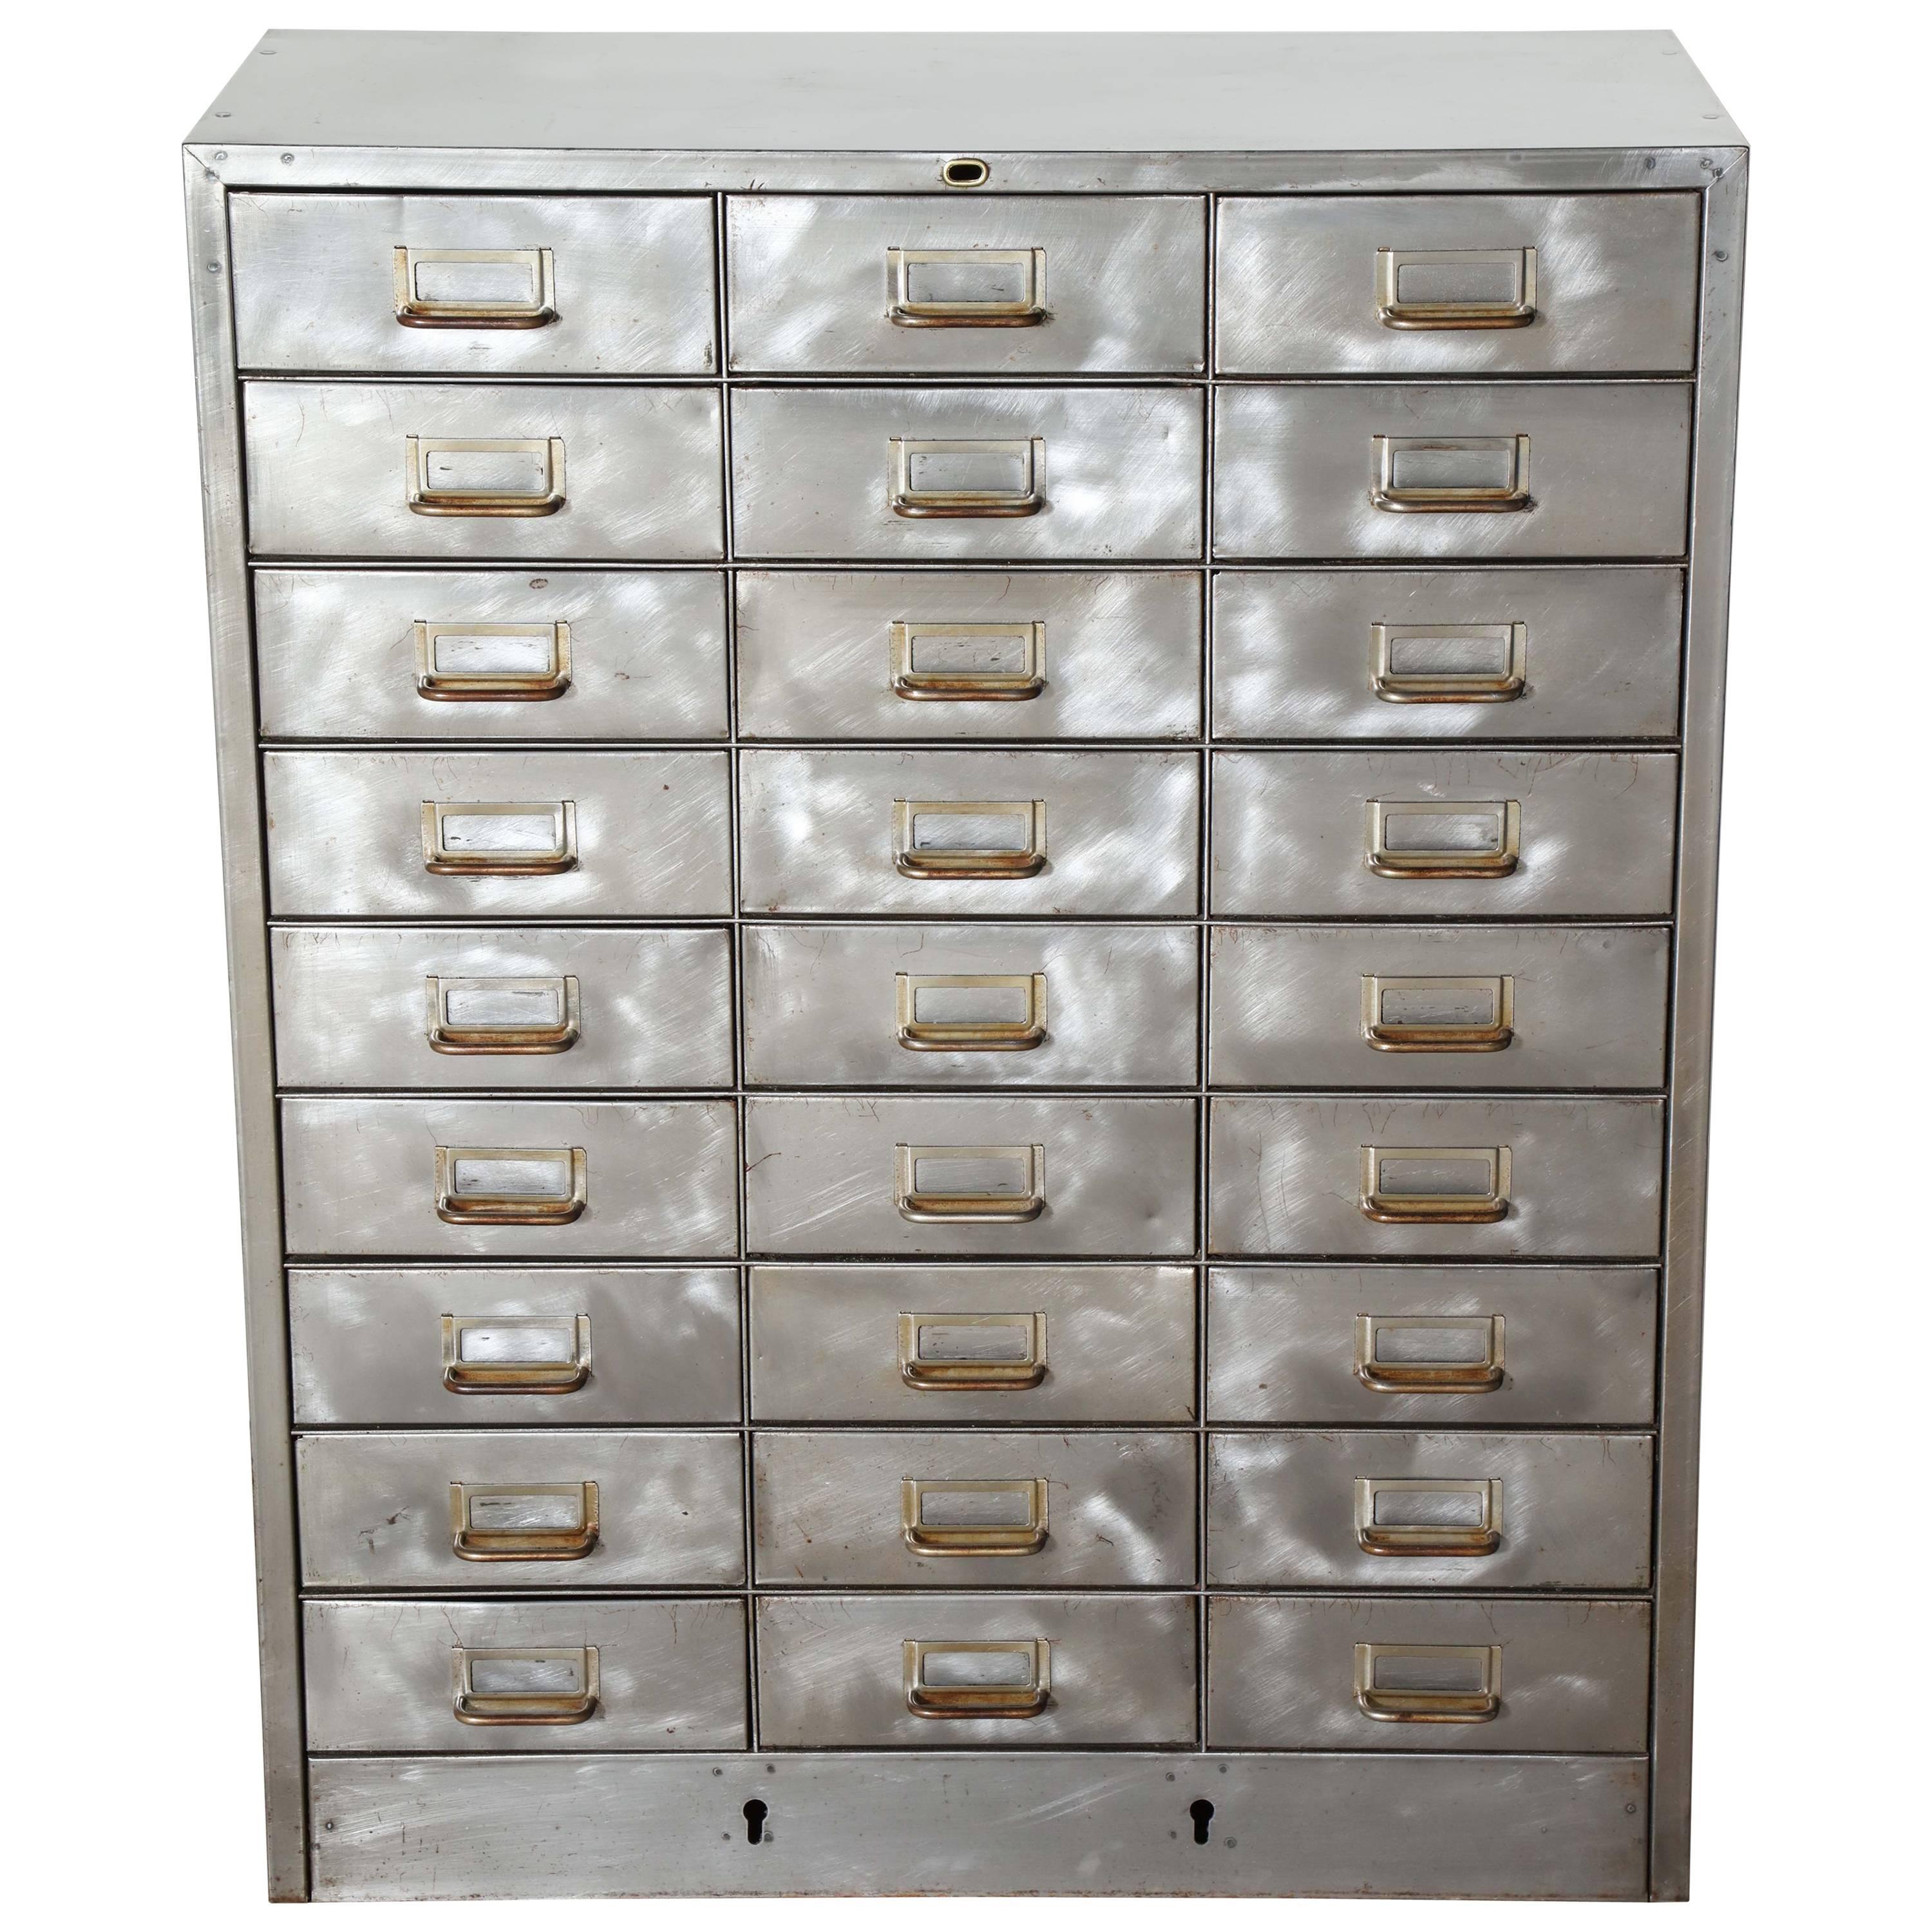 Early 20th Century 27 Drawer Industrial Apothecary